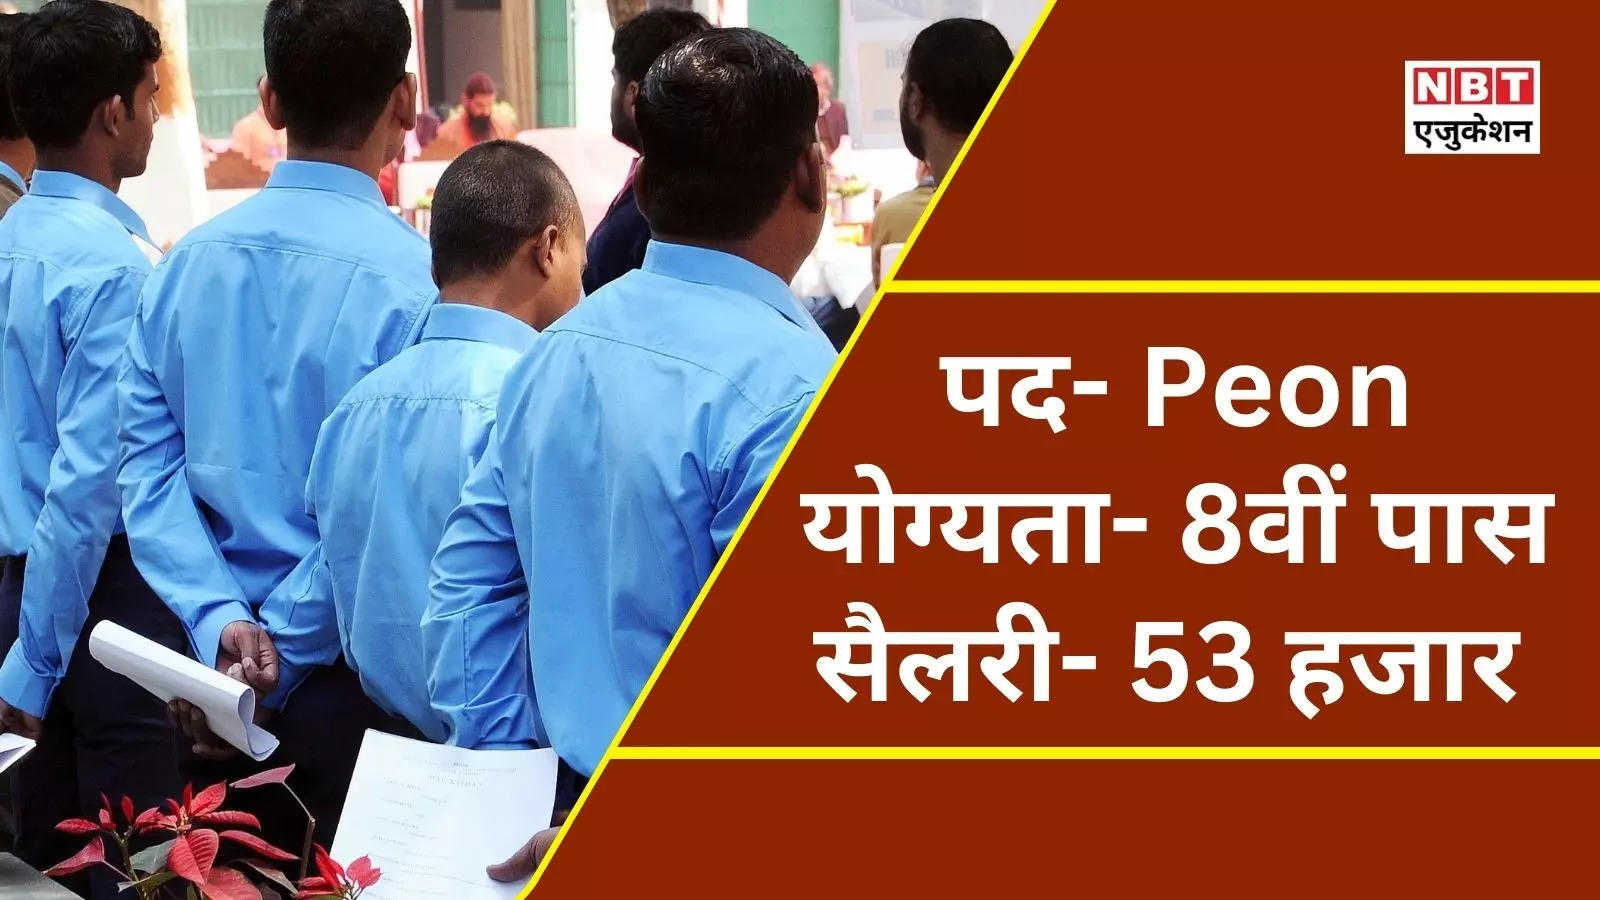 Top Job: 8th pass will get 53 thousand rupees, if you get the job of a peon in the district court then you will be happy